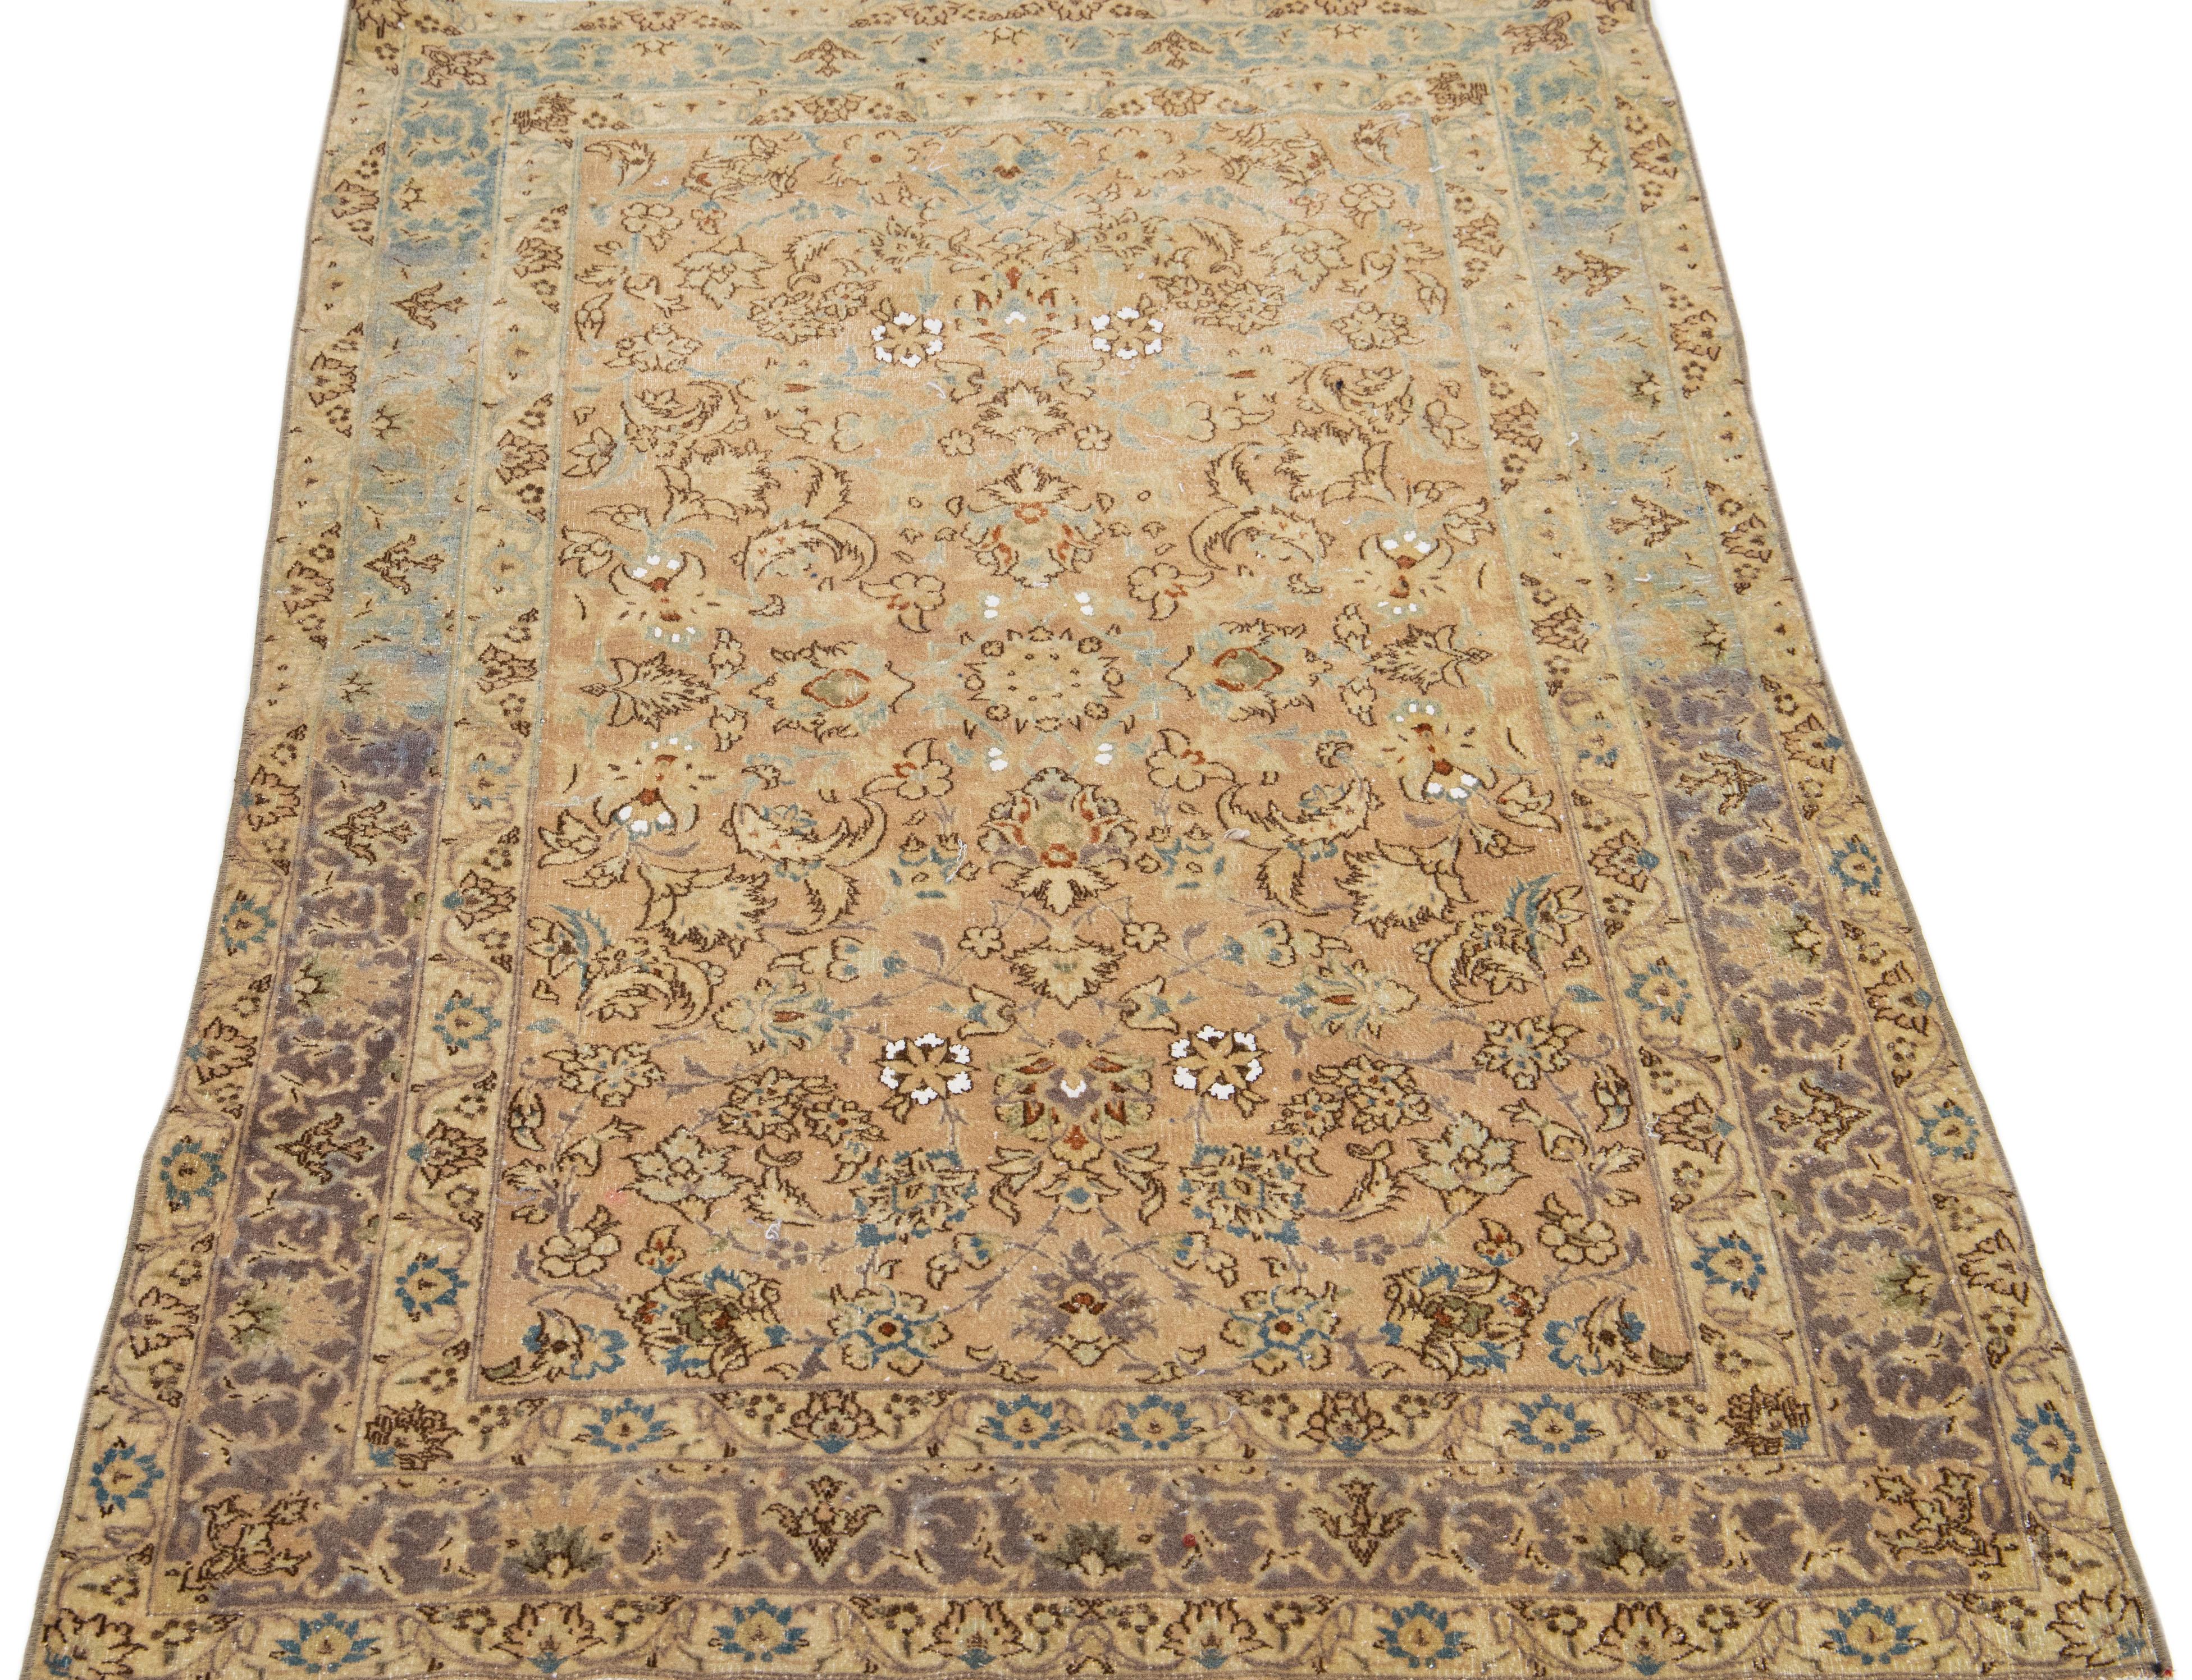 Beautiful antique Kirman hand-knotted wool runner with a beige color field. This Persian rug has a blue frame and accents in a gorgeous all-over floral motif.

This rug measures: 3' x 4'9